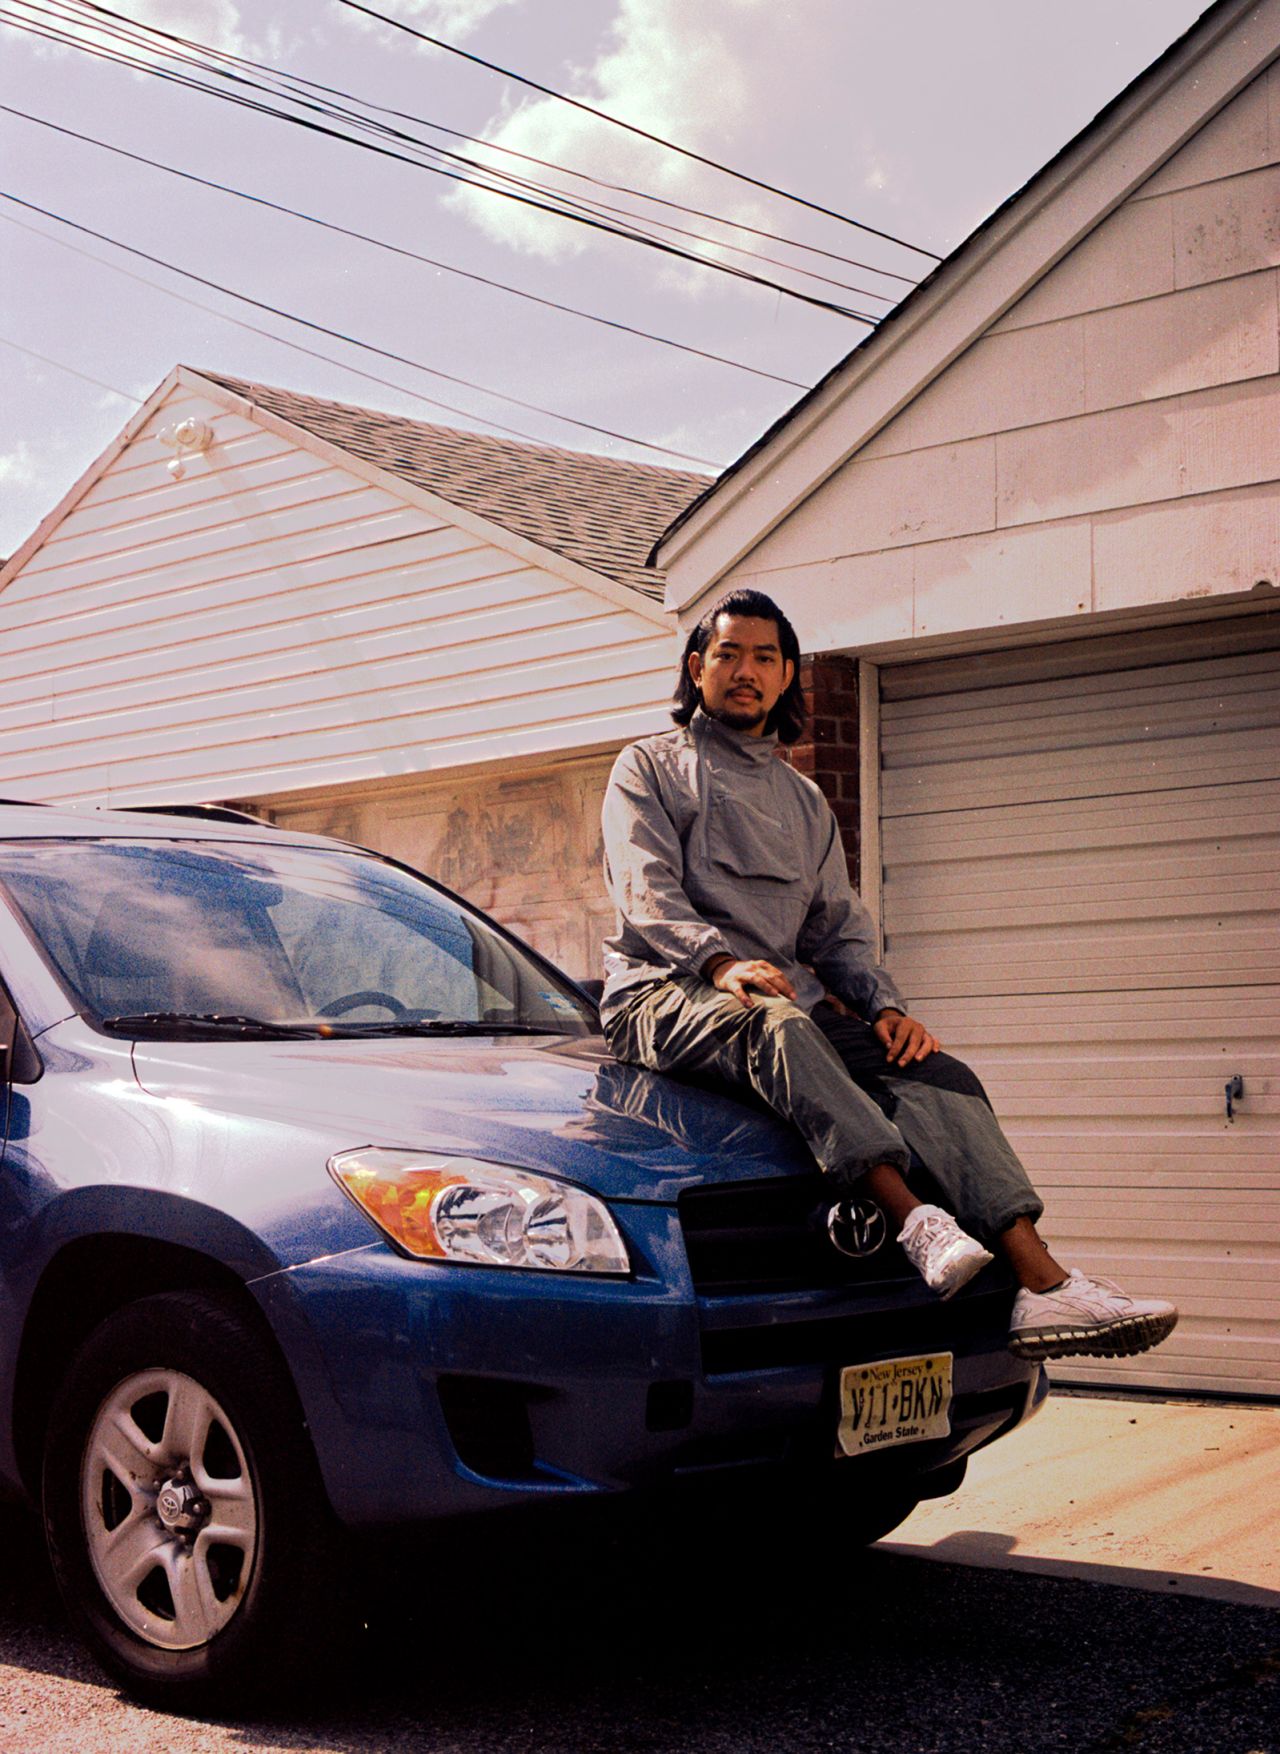 Tinhua sits on a blue car, mimicking his mother's pose in an old photo. The recreated images were shot on film, to match the intimate feel of the archival photos.